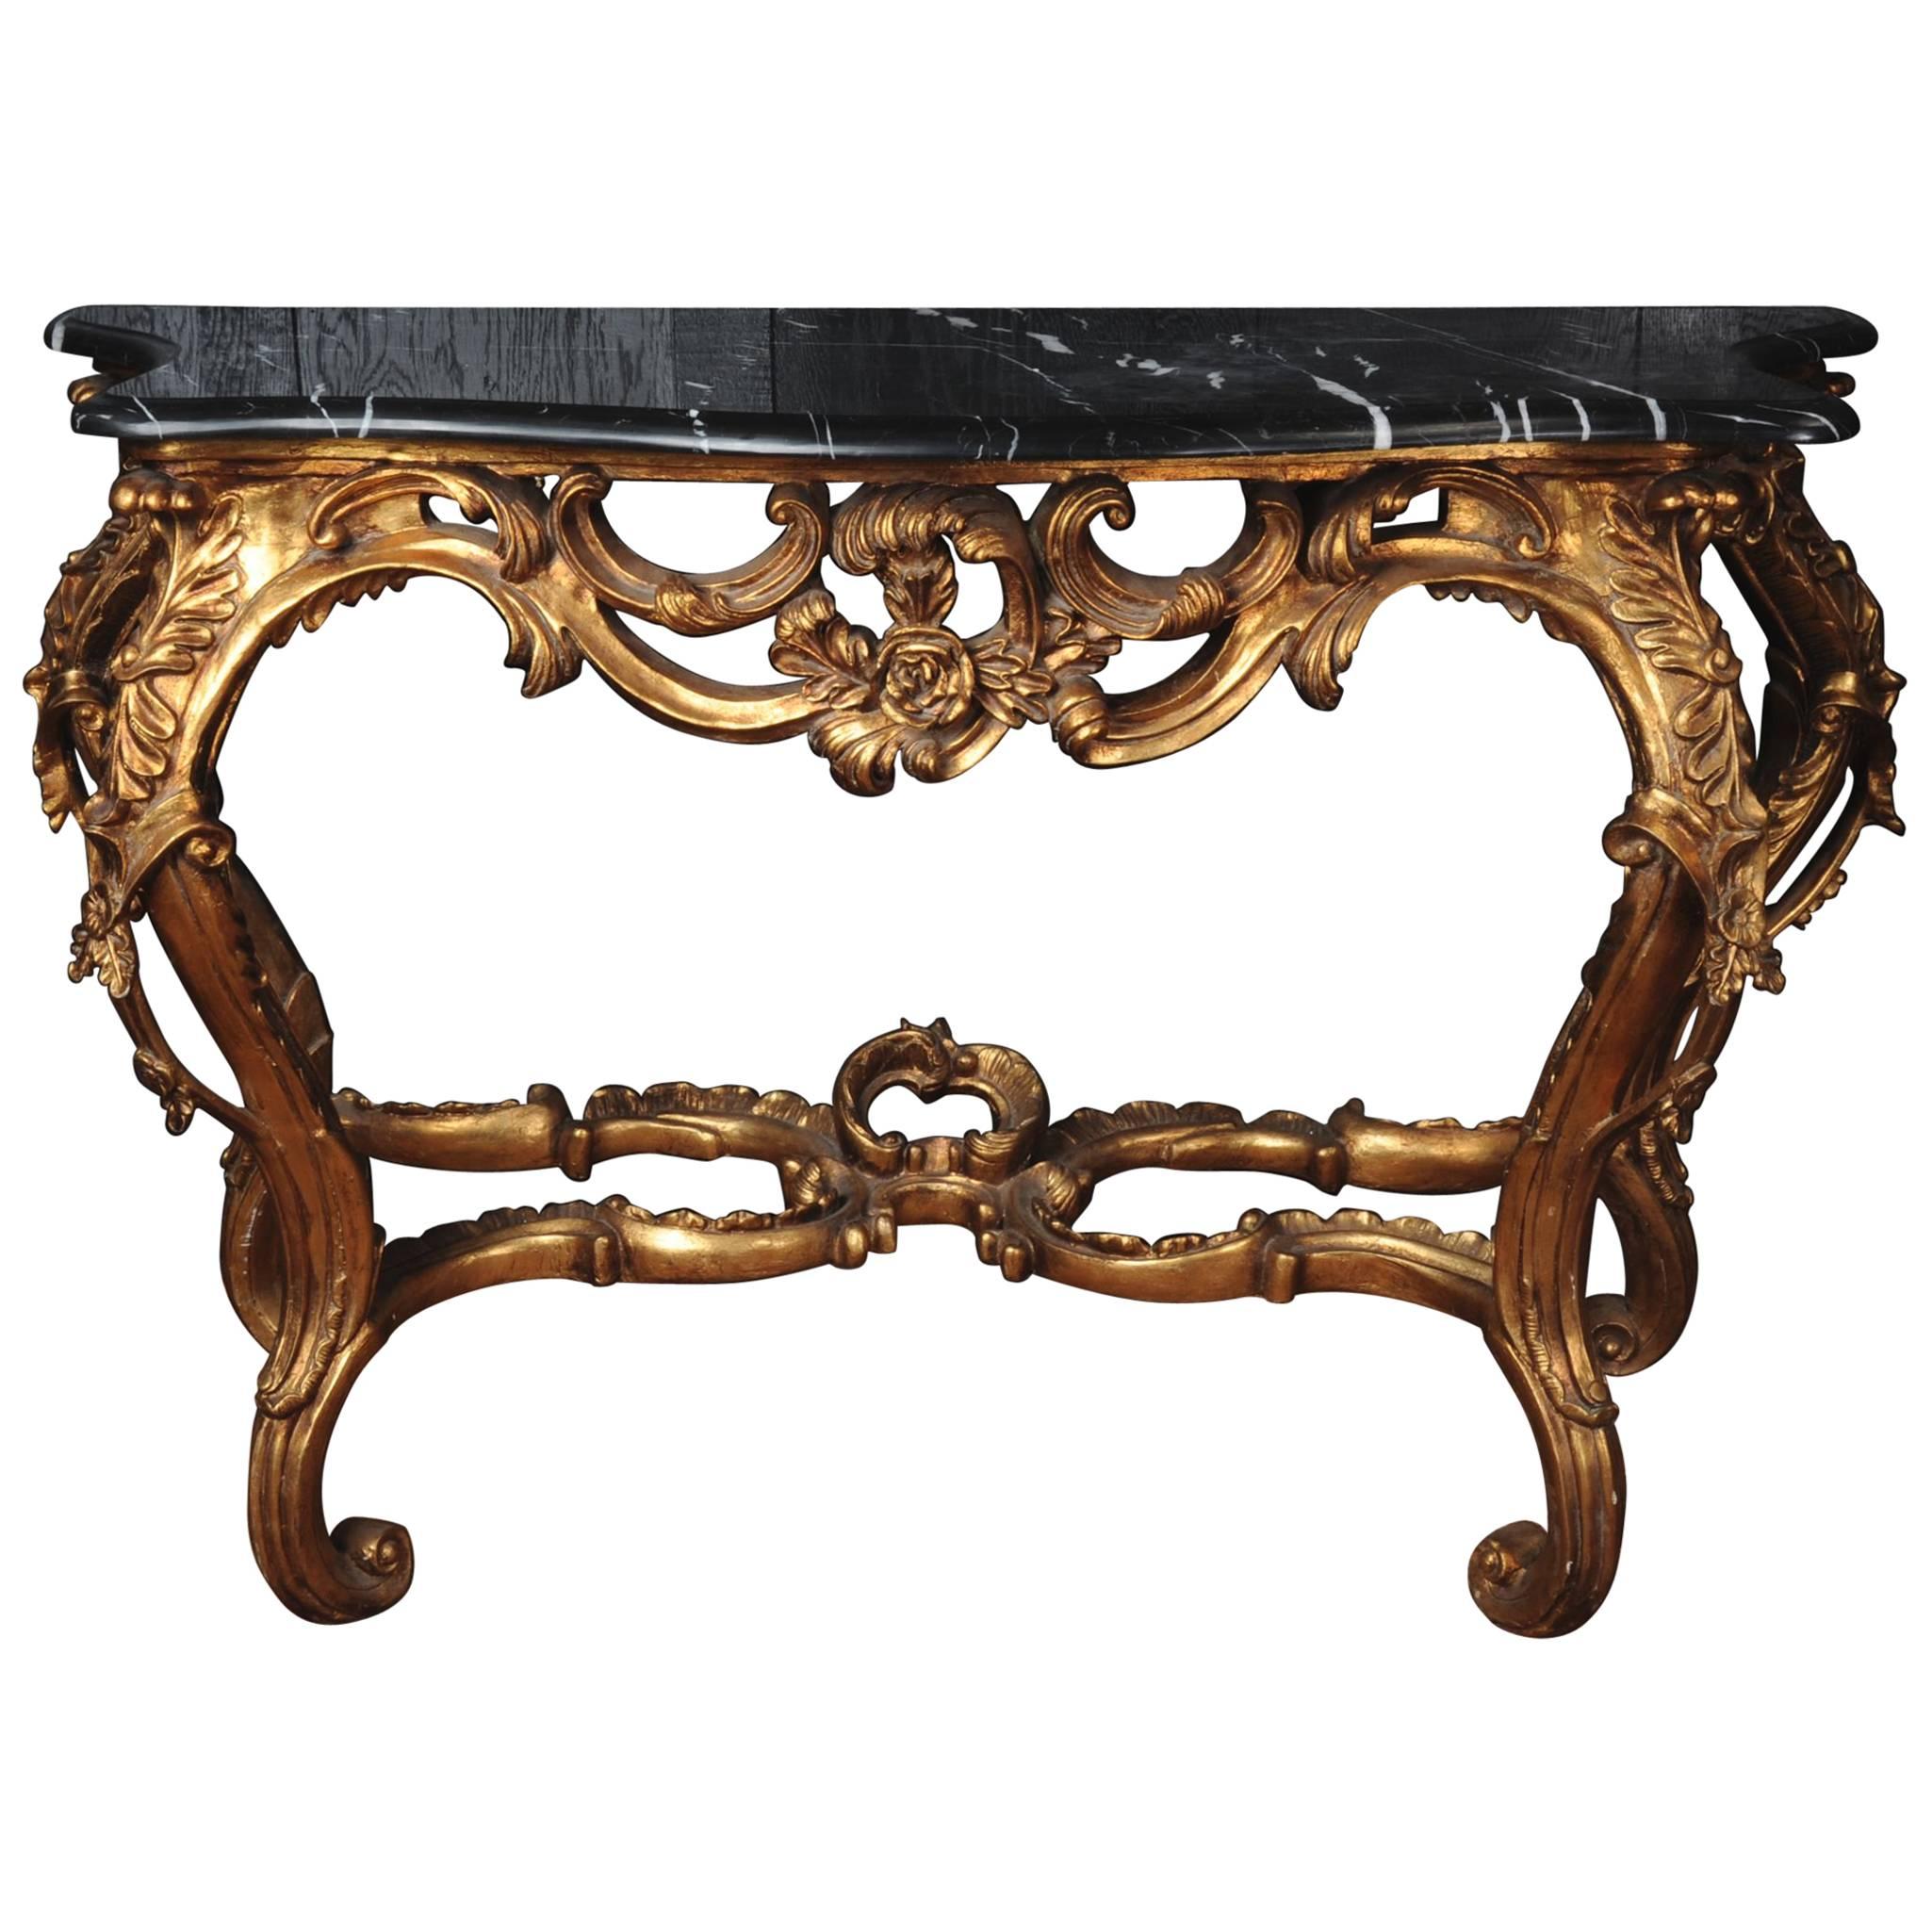 Rococo Giltwood Console Table with Black Marble Top